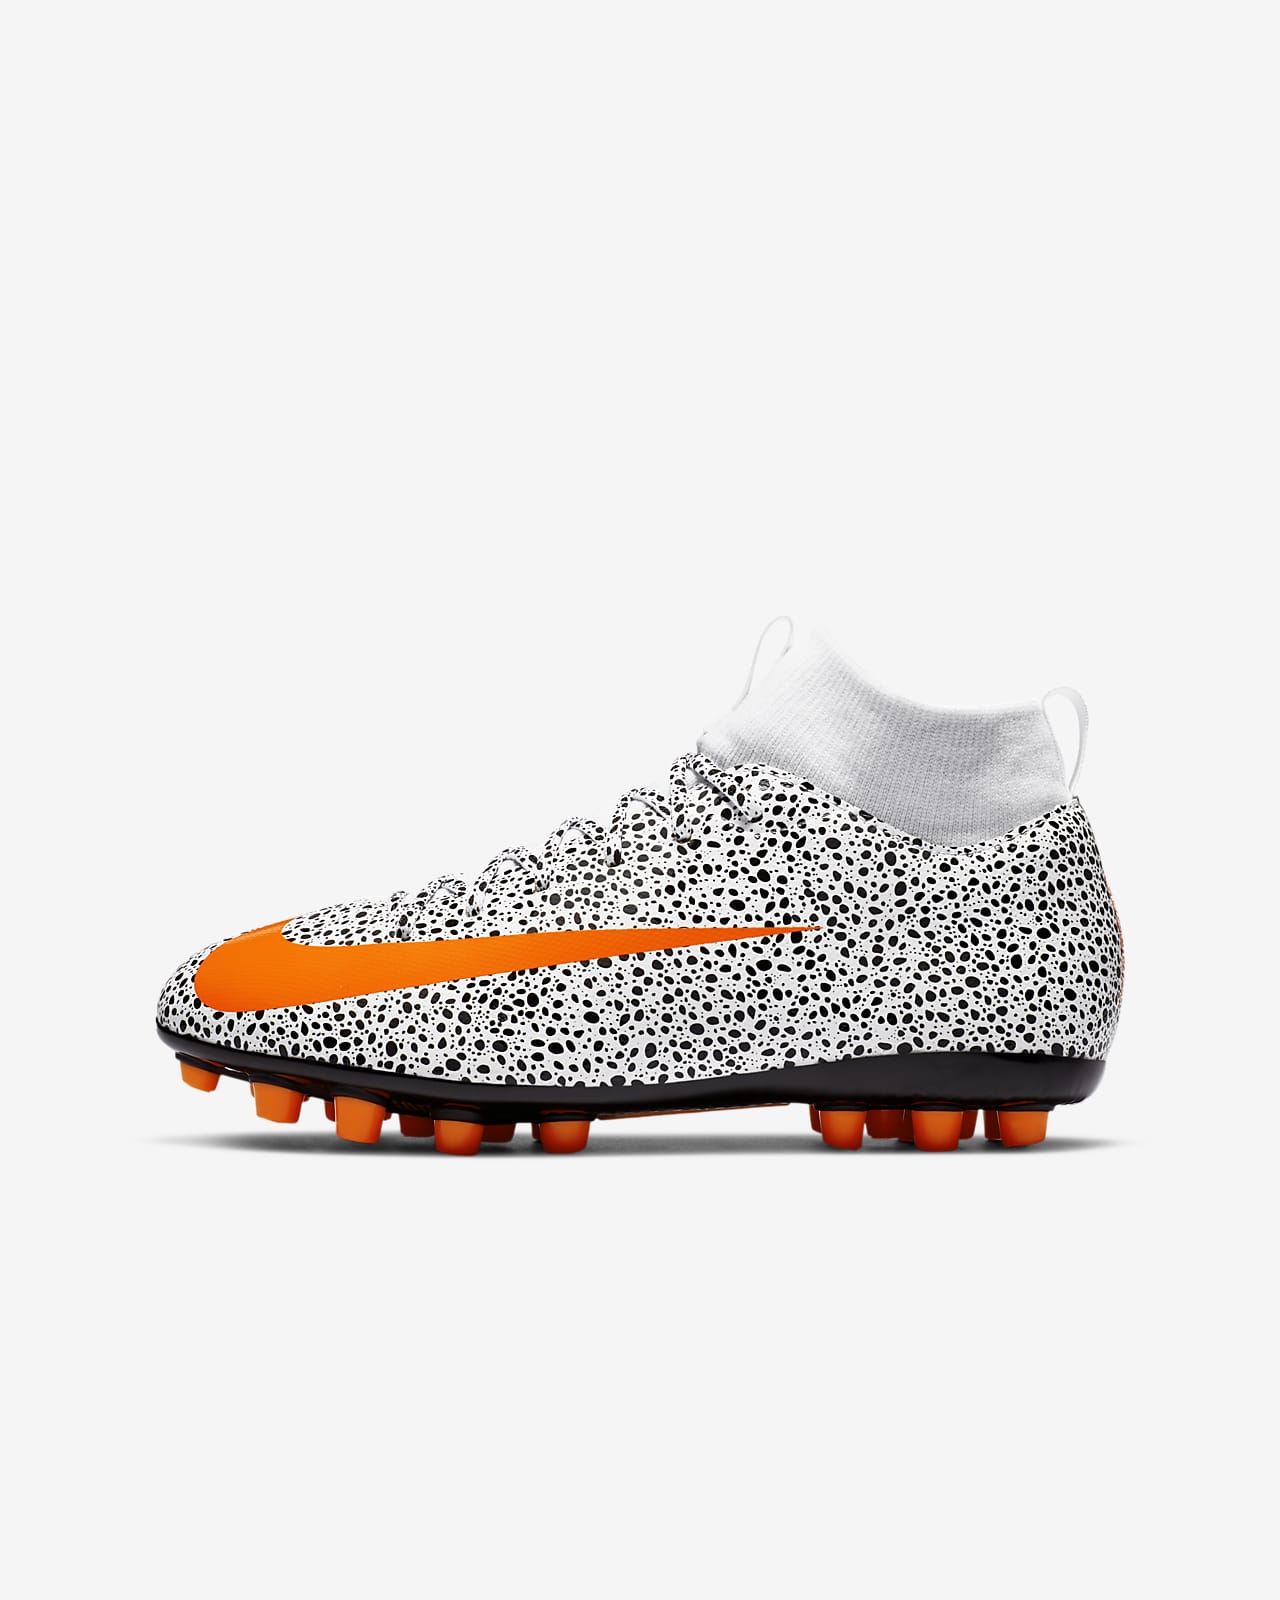 Special Edition Nike Mercurial Superfly CR7 'Shuai' Boots .